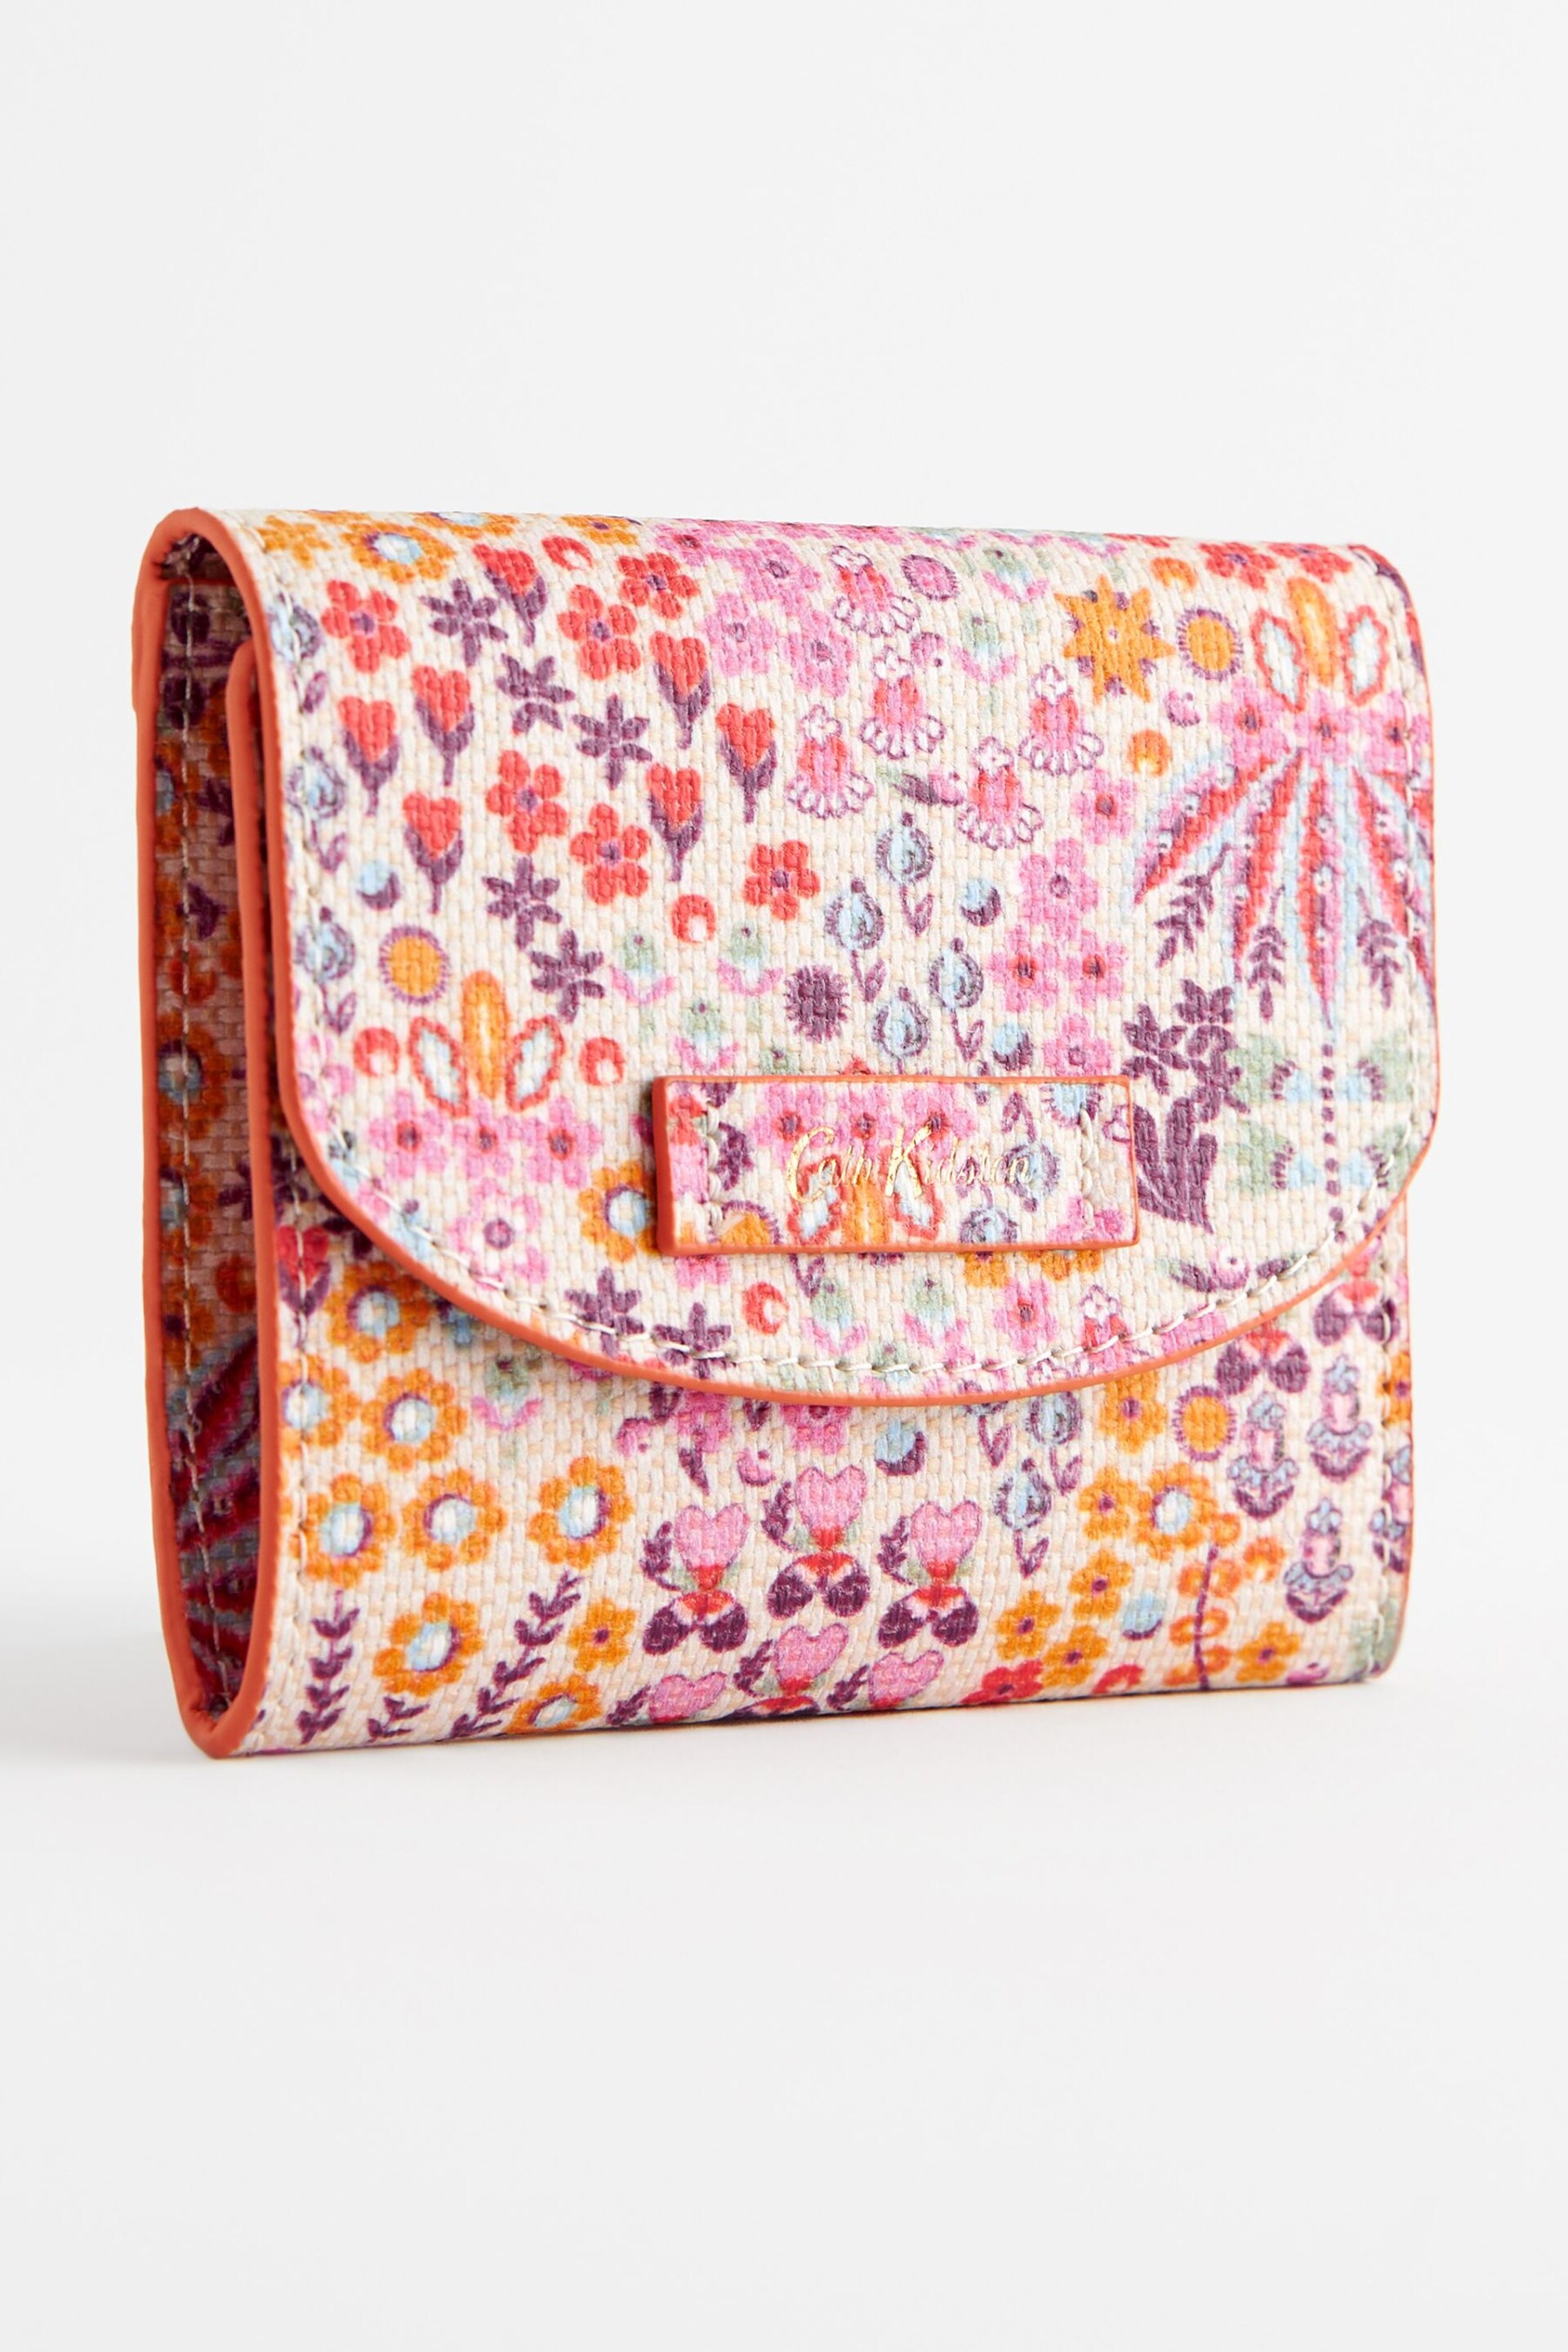 Cath Kidston Pink Ditsy Floral Fold Over Purse - Image 1 of 5